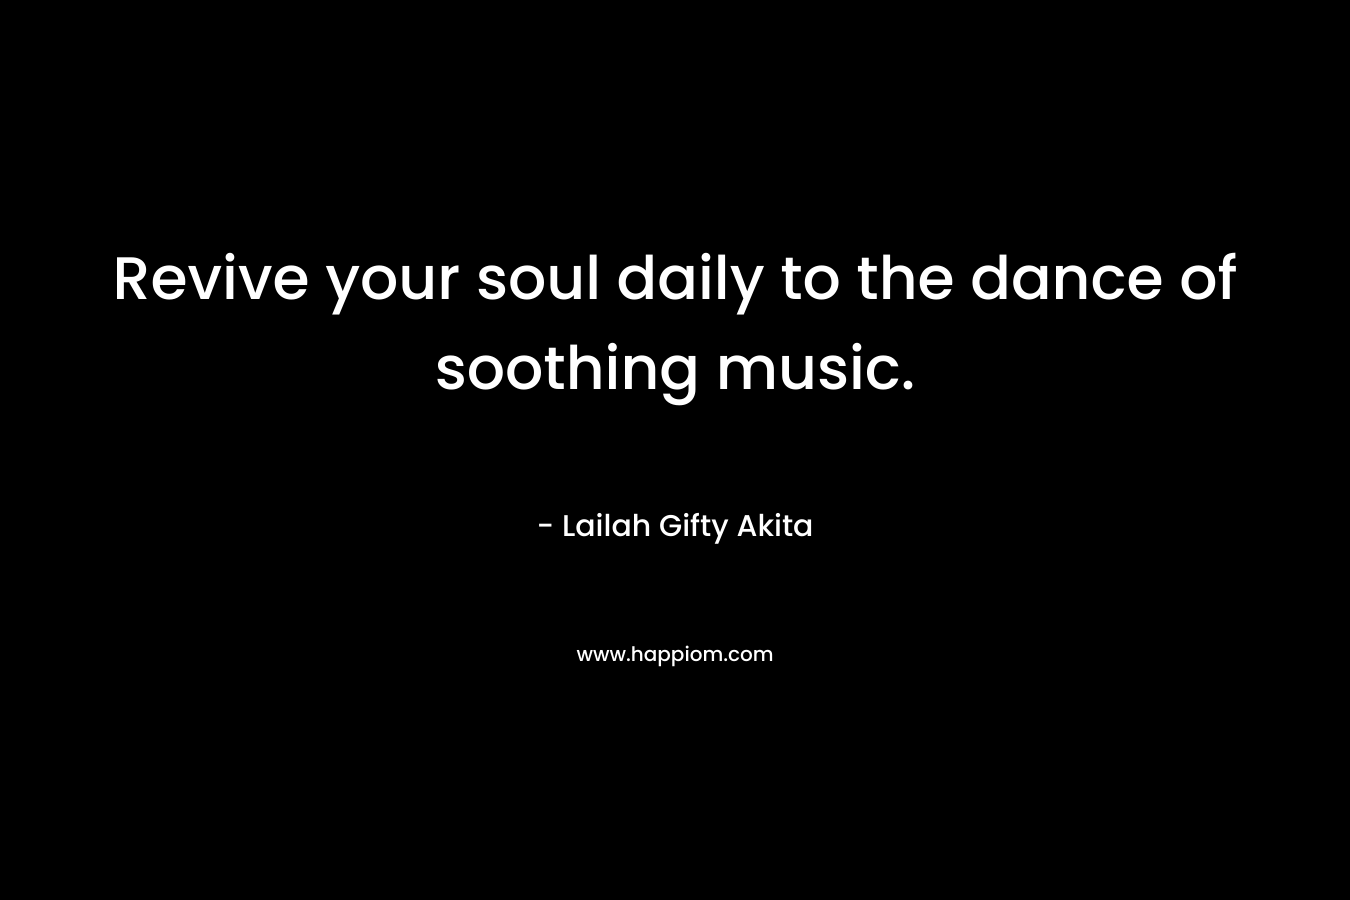 Revive your soul daily to the dance of soothing music.